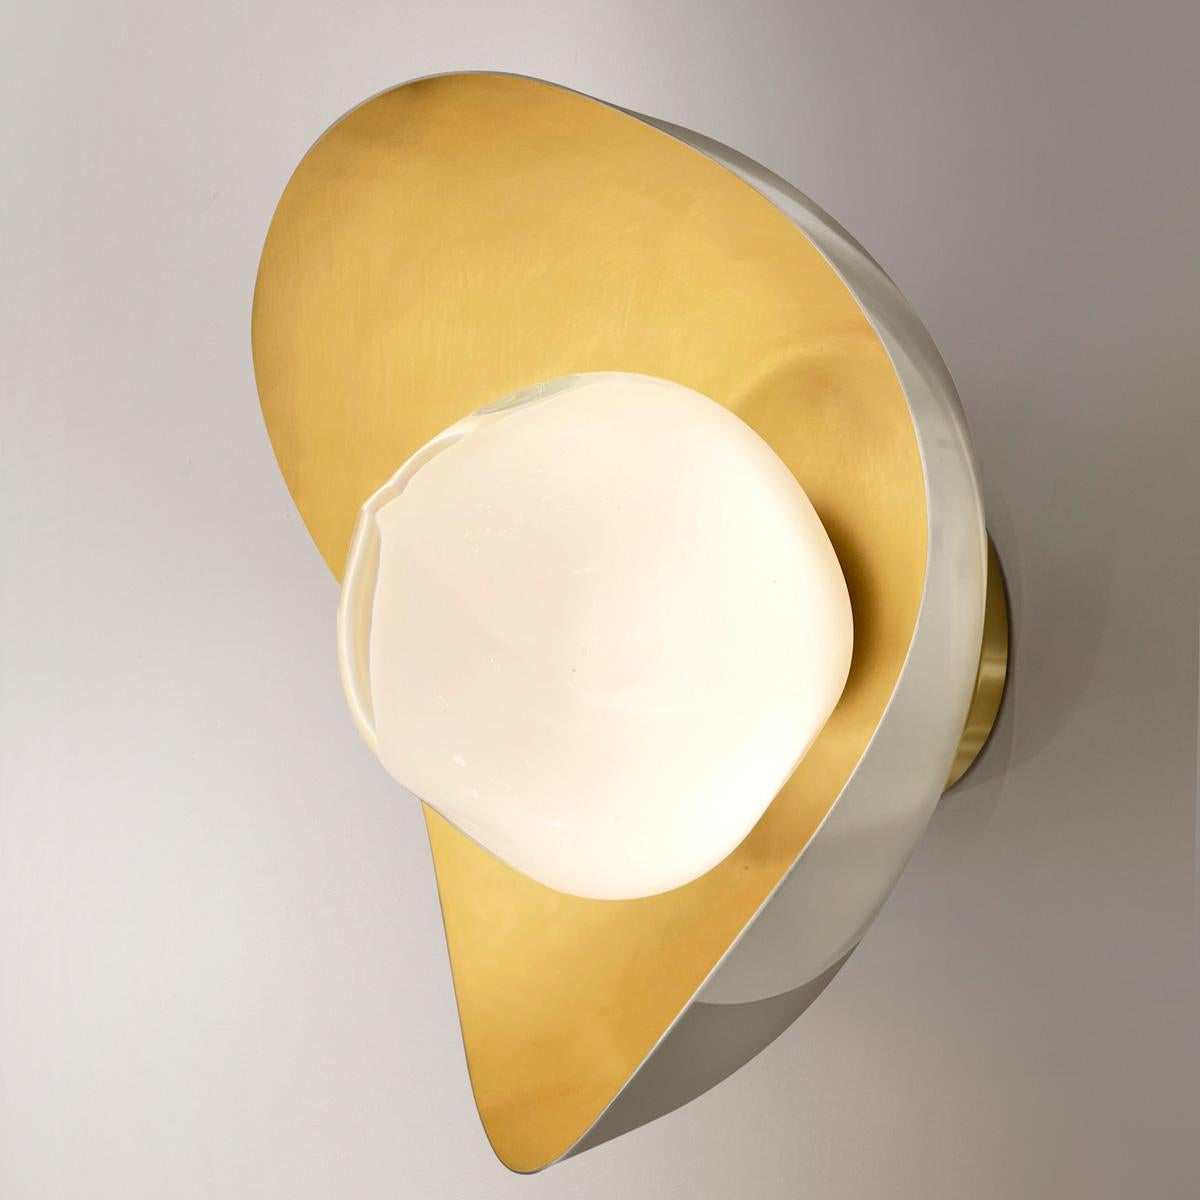 The Perla wall light features an organic brass shell nestling our Sfera glass handblown in Tuscany. The first images show the fixture with a satin brass interior and polished nickel exterior finish-subsequent pictures show it in a selection of